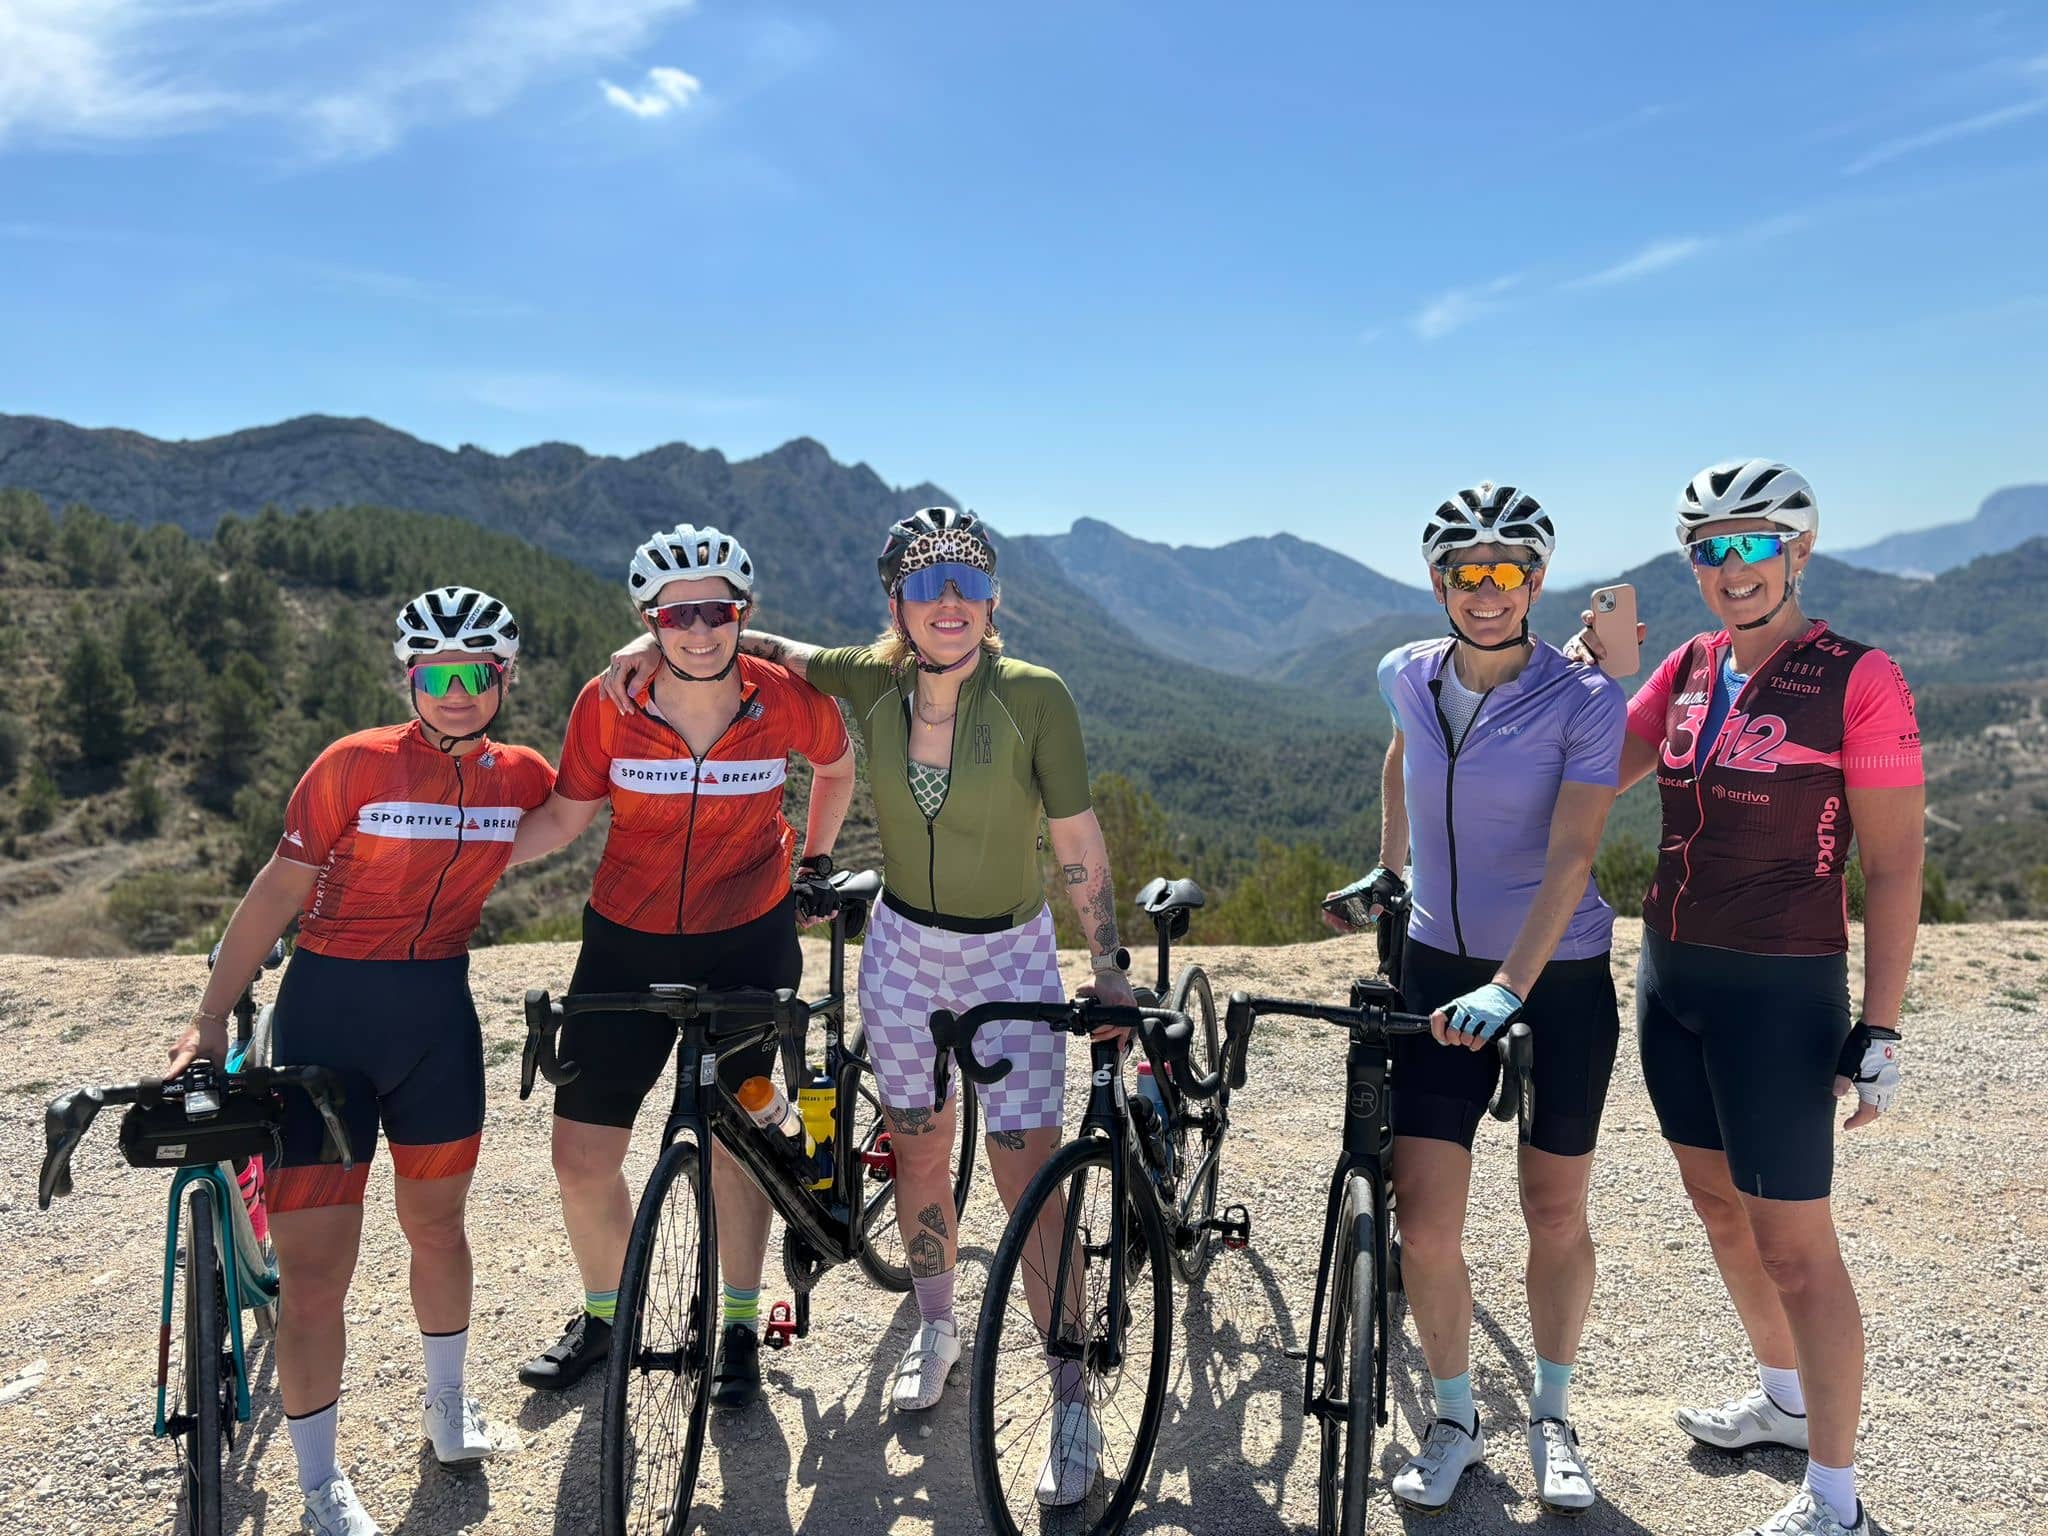 Group pic of women cyclists